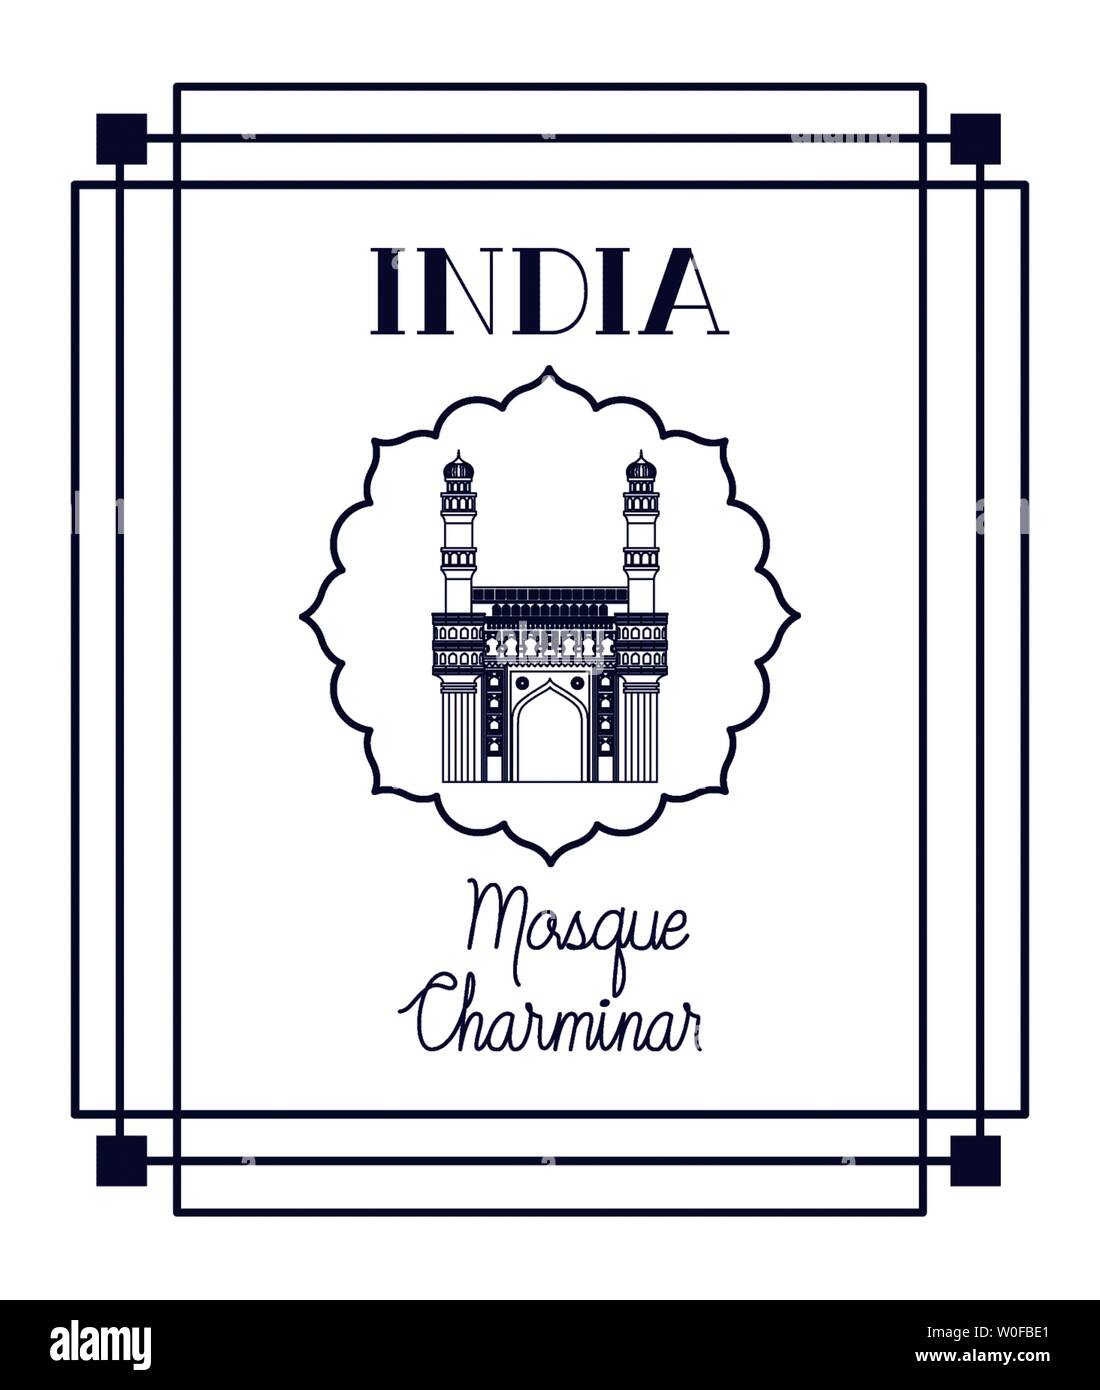 indian mosque chaminar temple with square frame Stock Vector